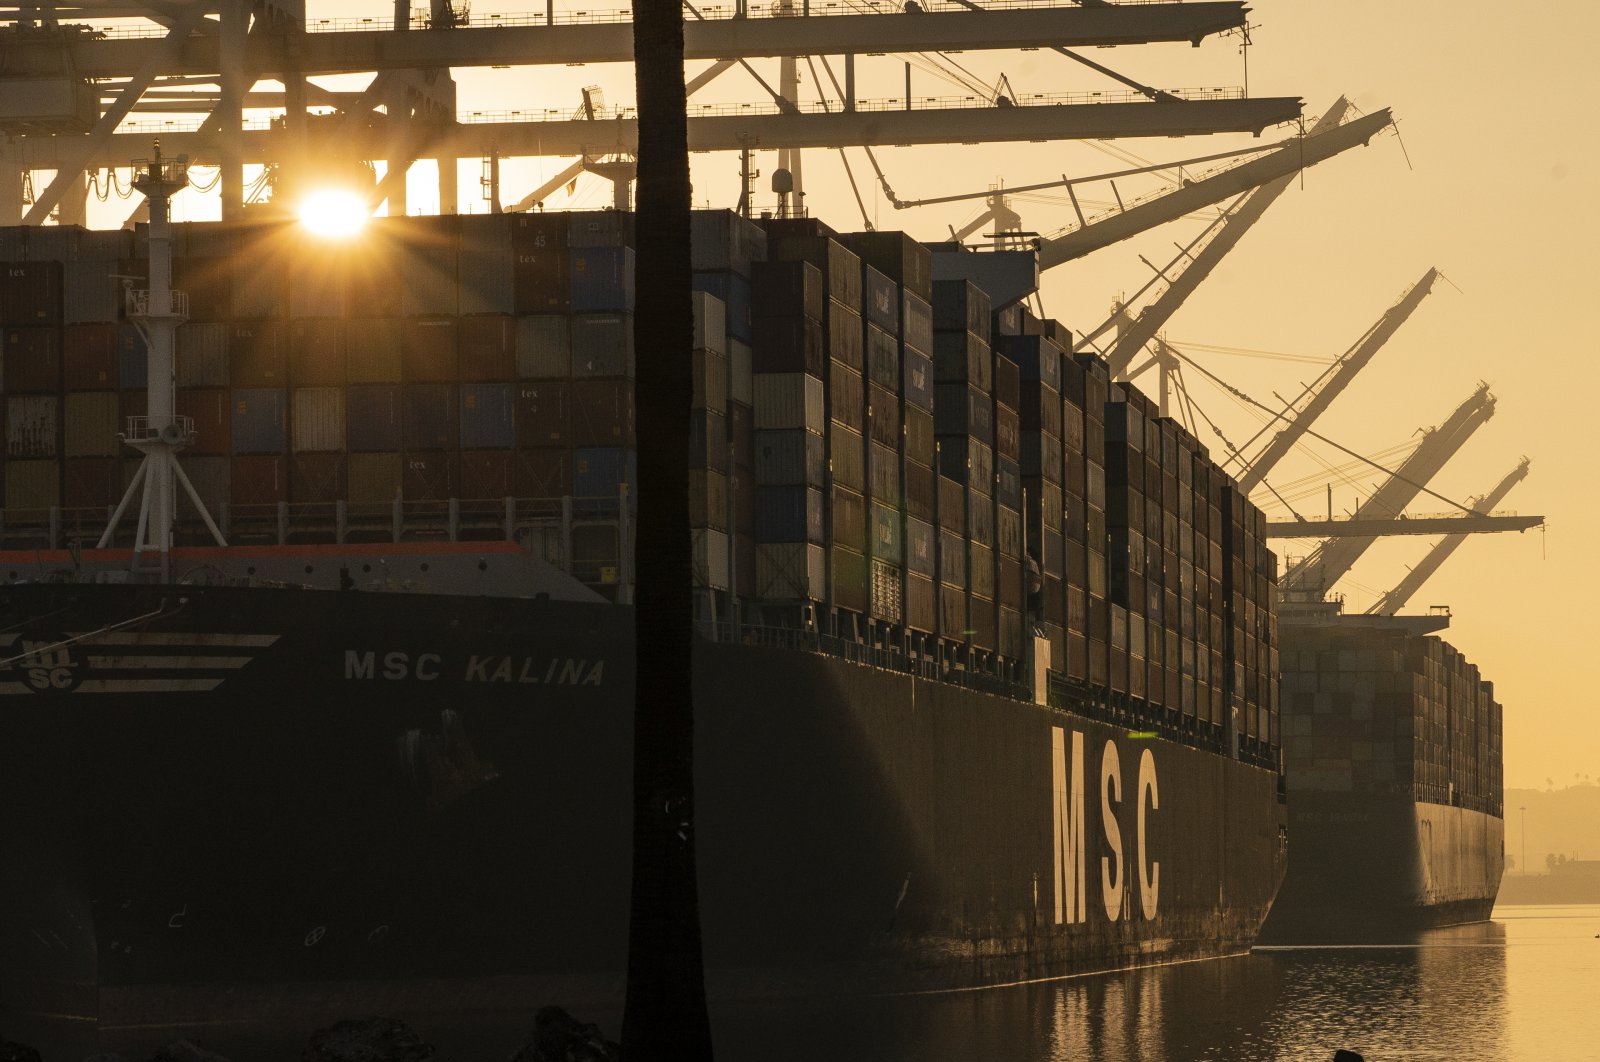 The MSC Kalina shipping container is moored at Maersk APM Terminals Pacific at the Port of Los Angeles, U.S., Nov. 30, 2021. (AP Photo)